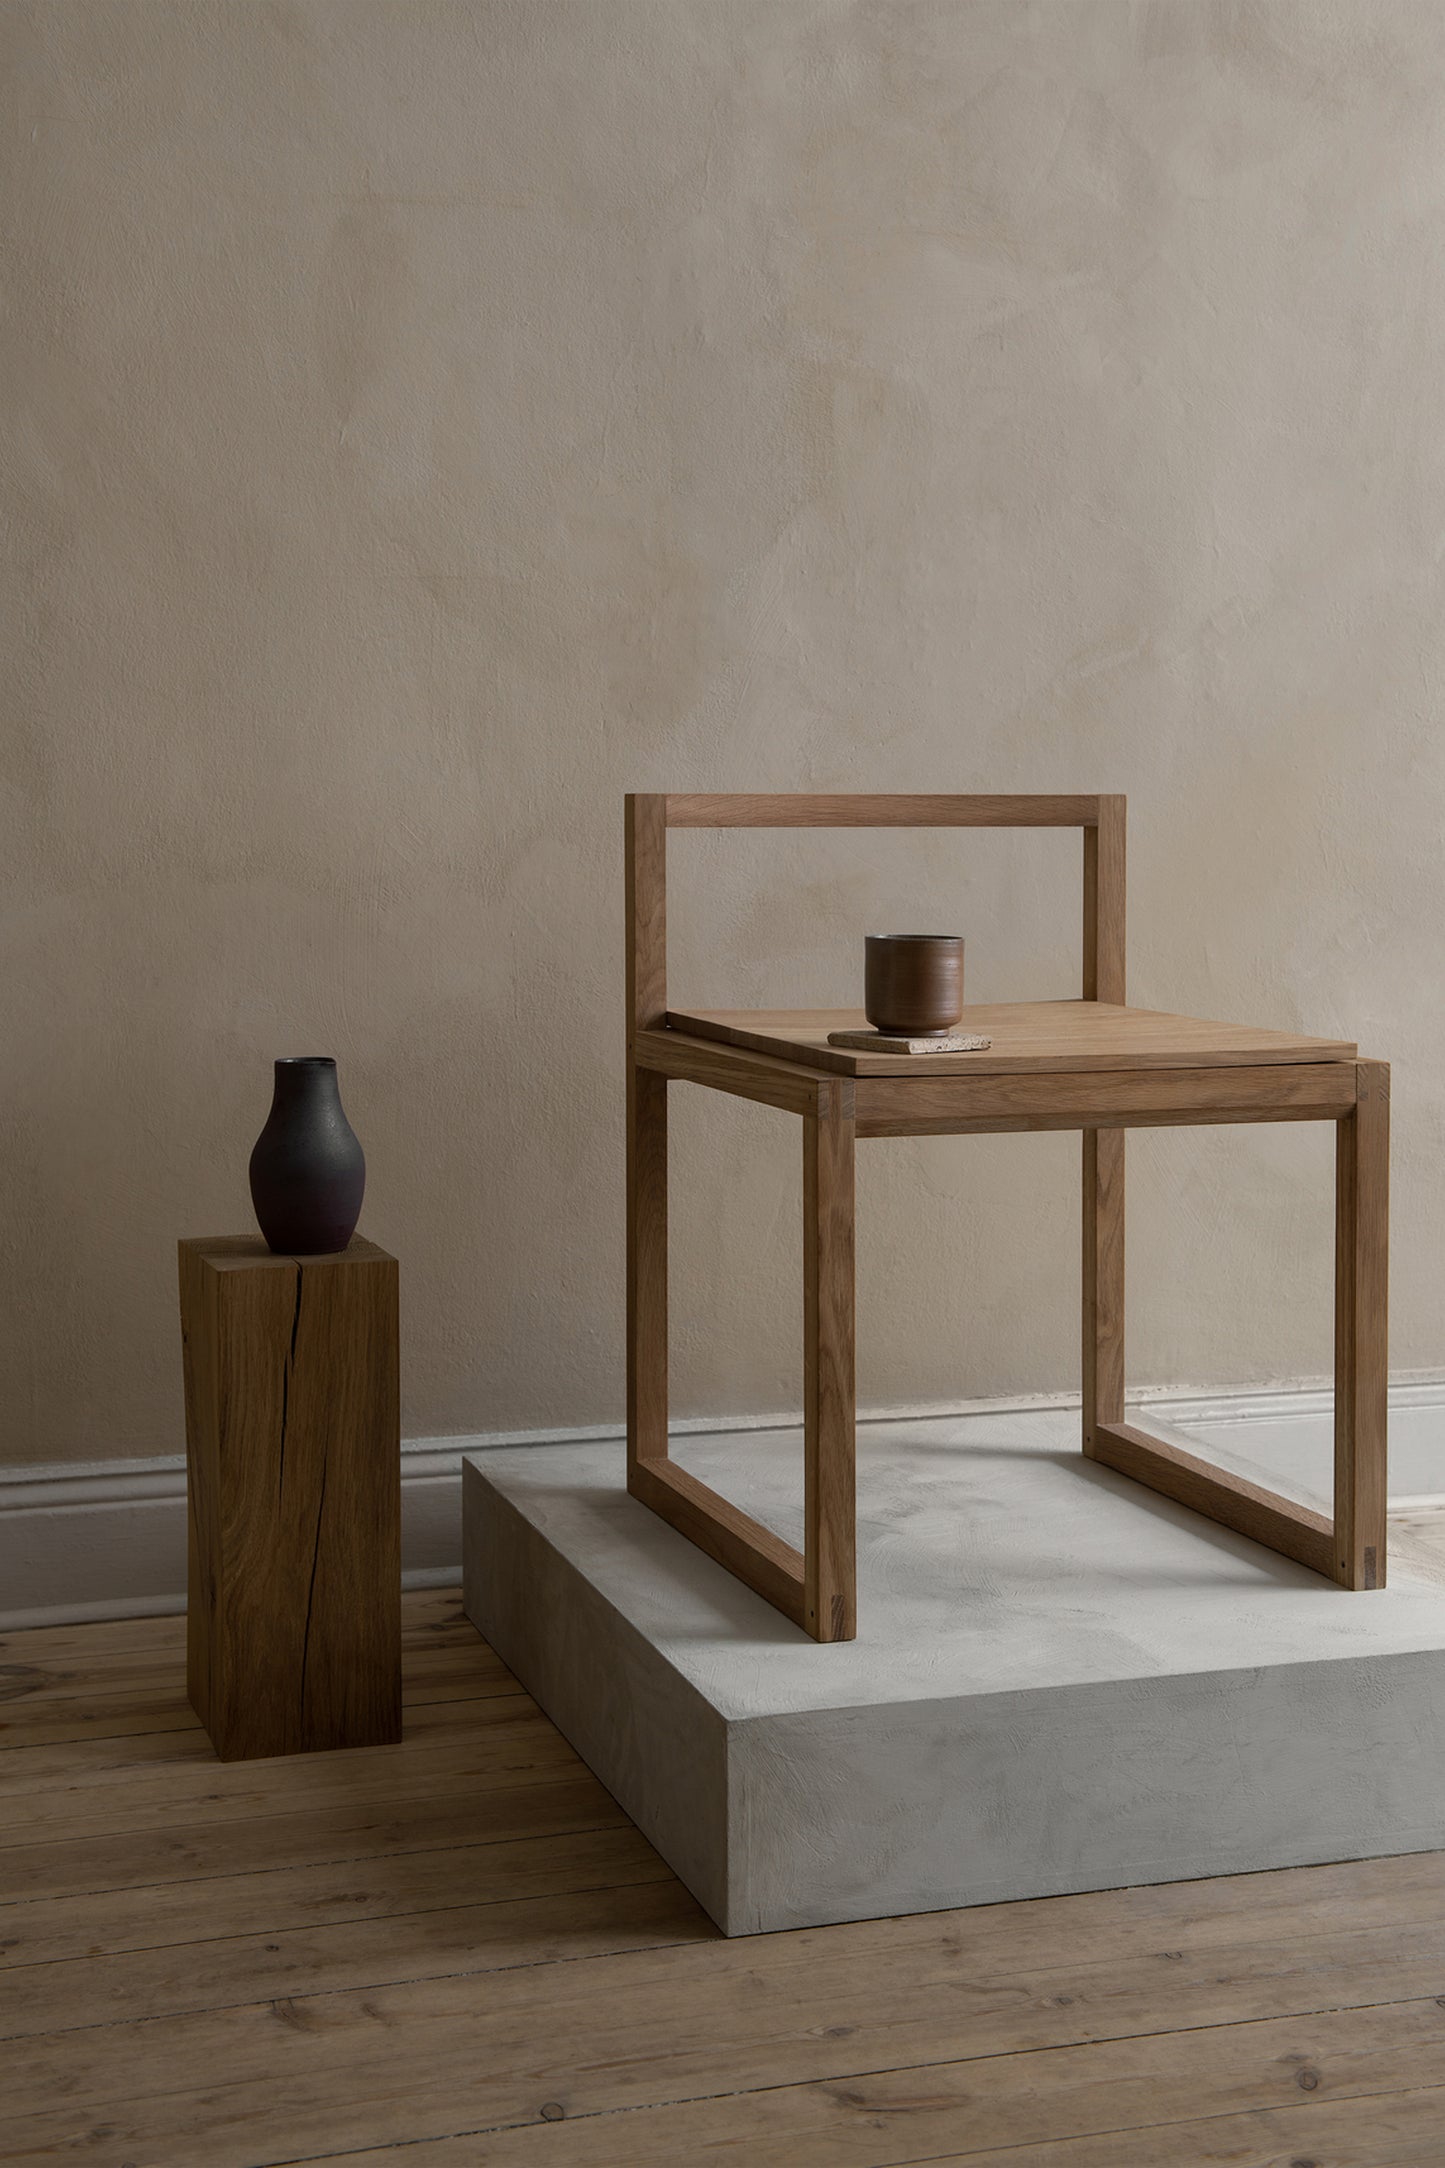 Outline Chair 02 by Bonni Bonne - an Oak wooden chair with Japanese style influence